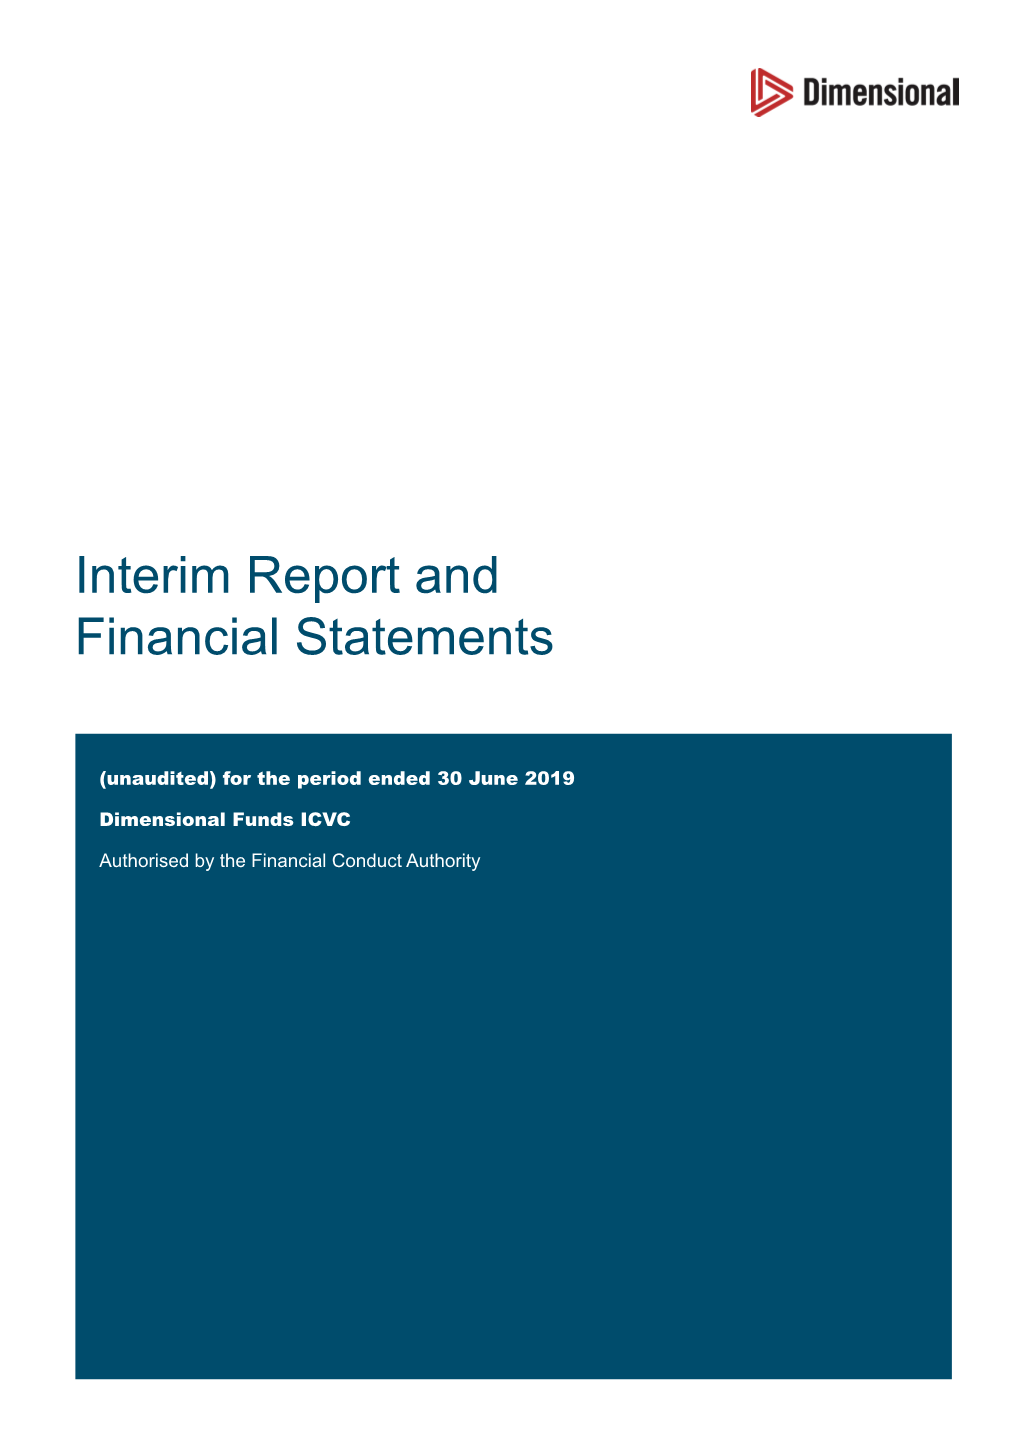 Interim Report and Financial Statements